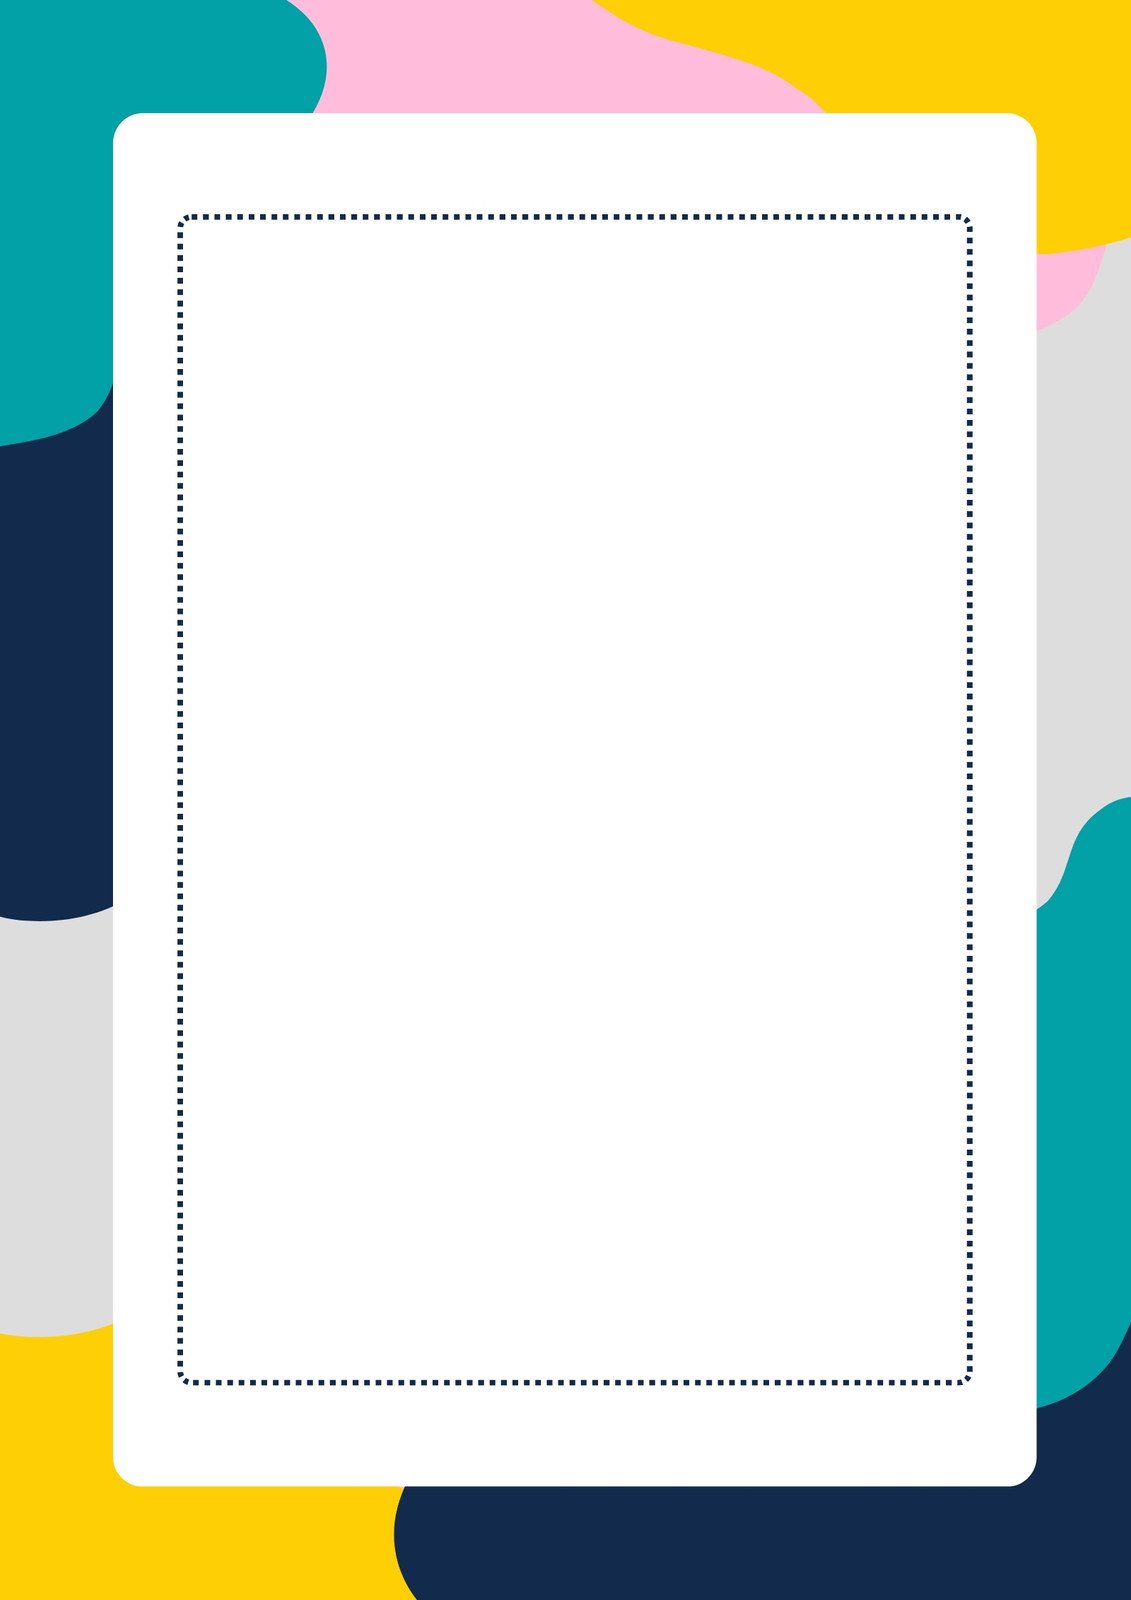 colorful abstract border design